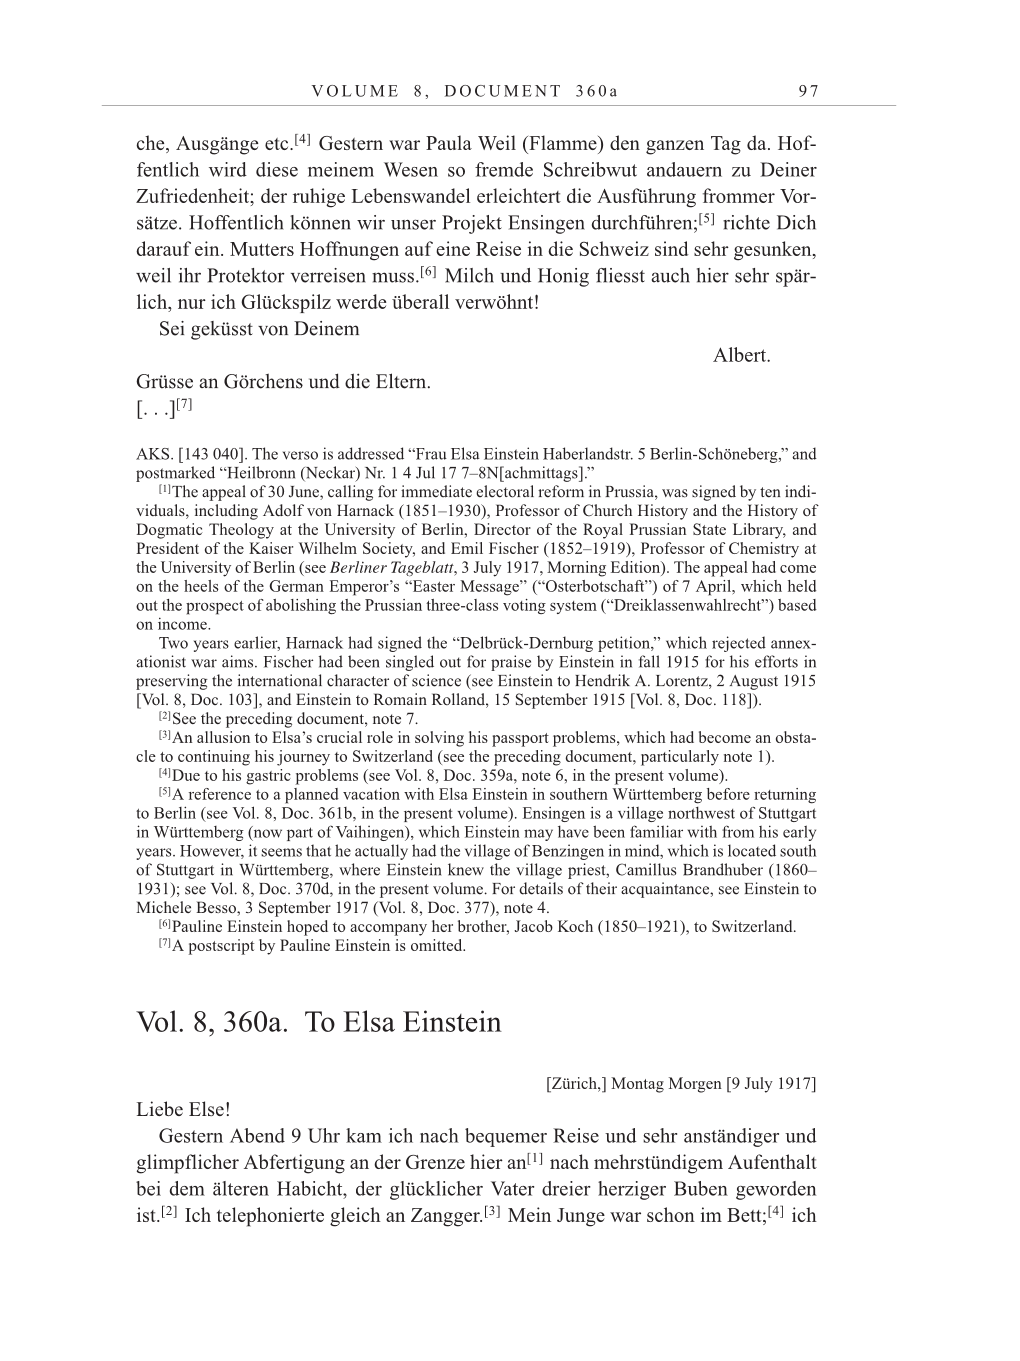 Volume 10: The Berlin Years: Correspondence May-December 1920 / Supplementary Correspondence 1909-1920 page 97